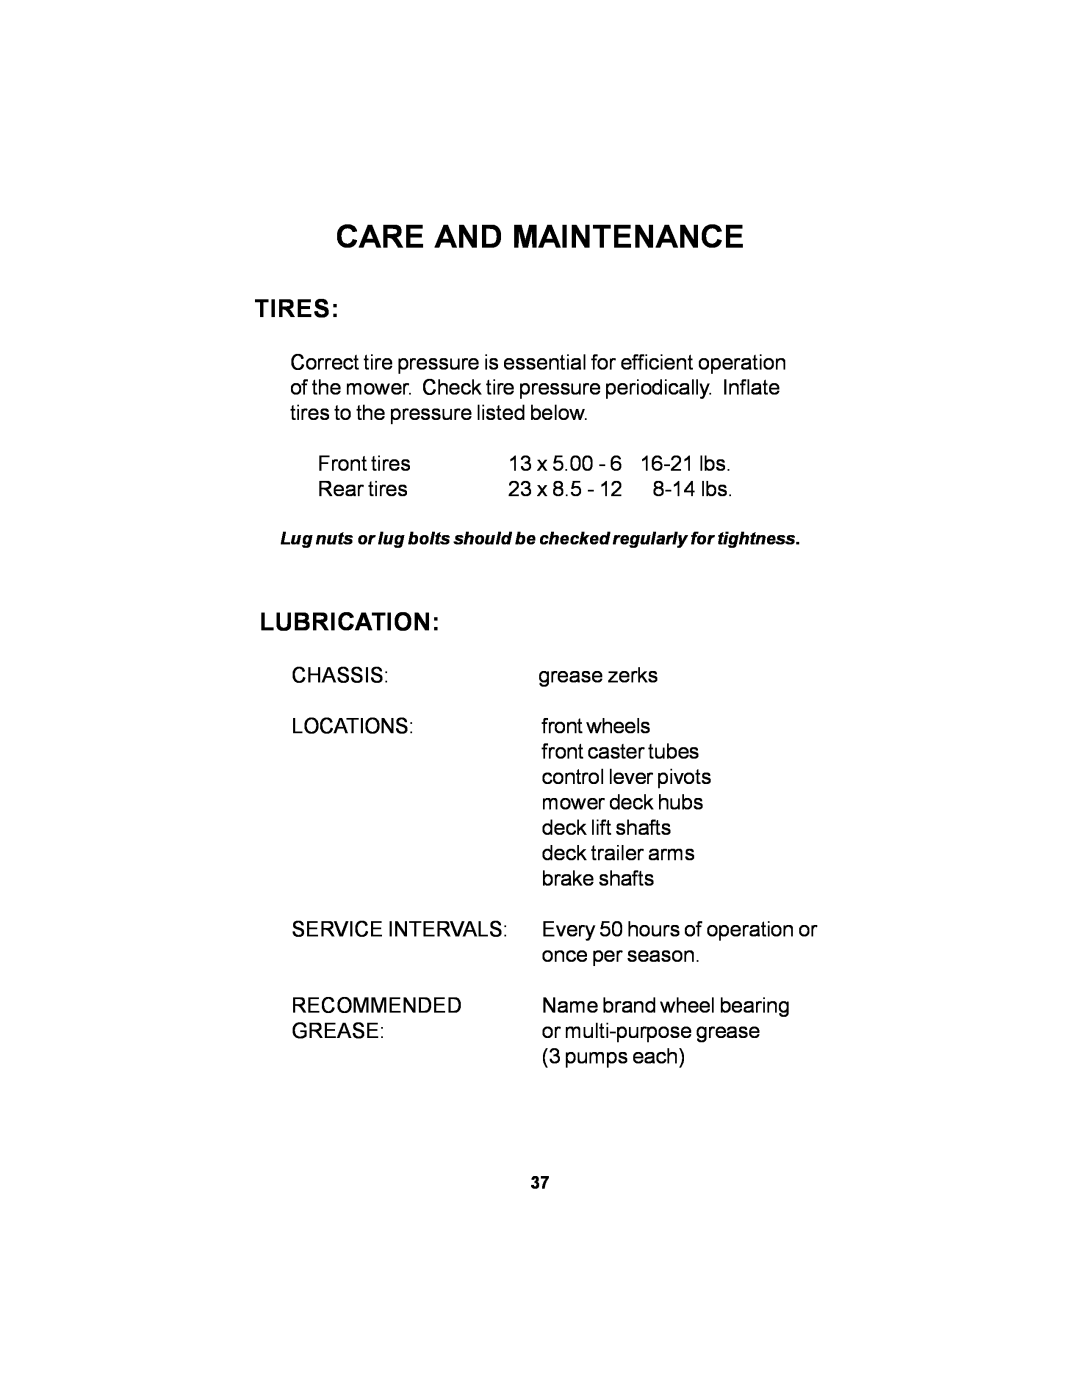 Dixon 11249-106 manual Tires, Lubrication, Care And Maintenance 